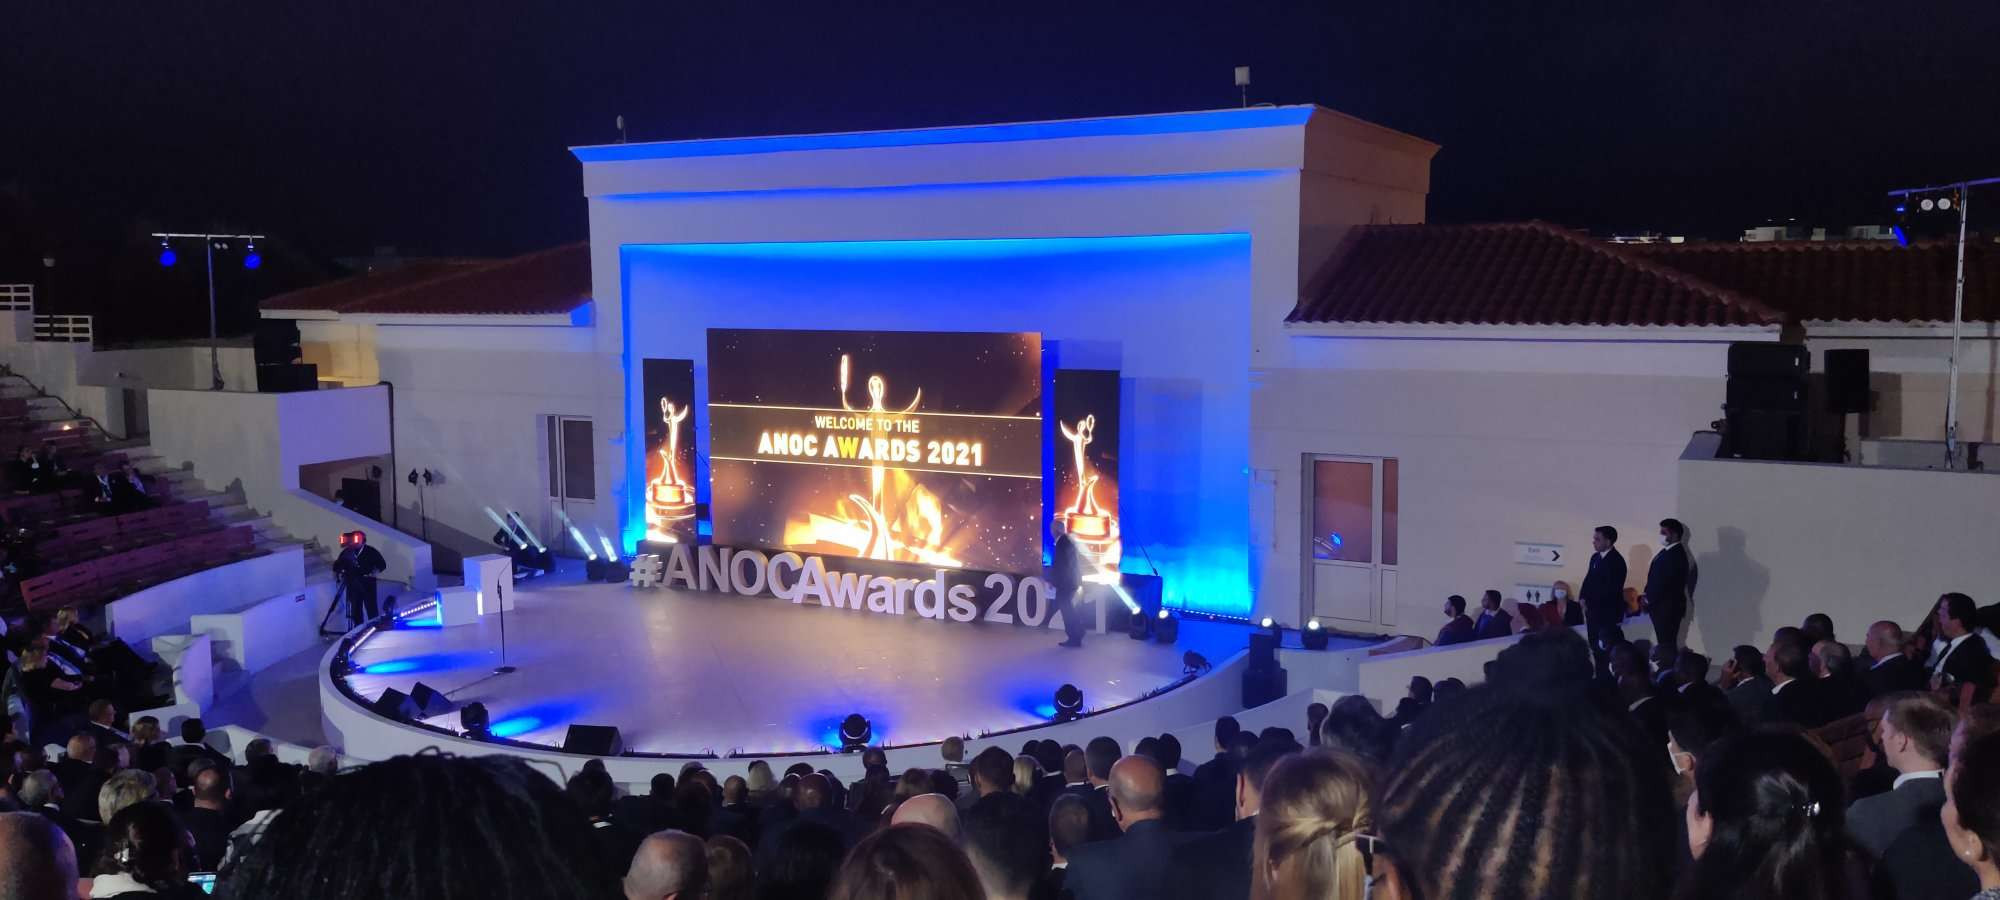 The first day concluded with the ANOC awards ©ITG